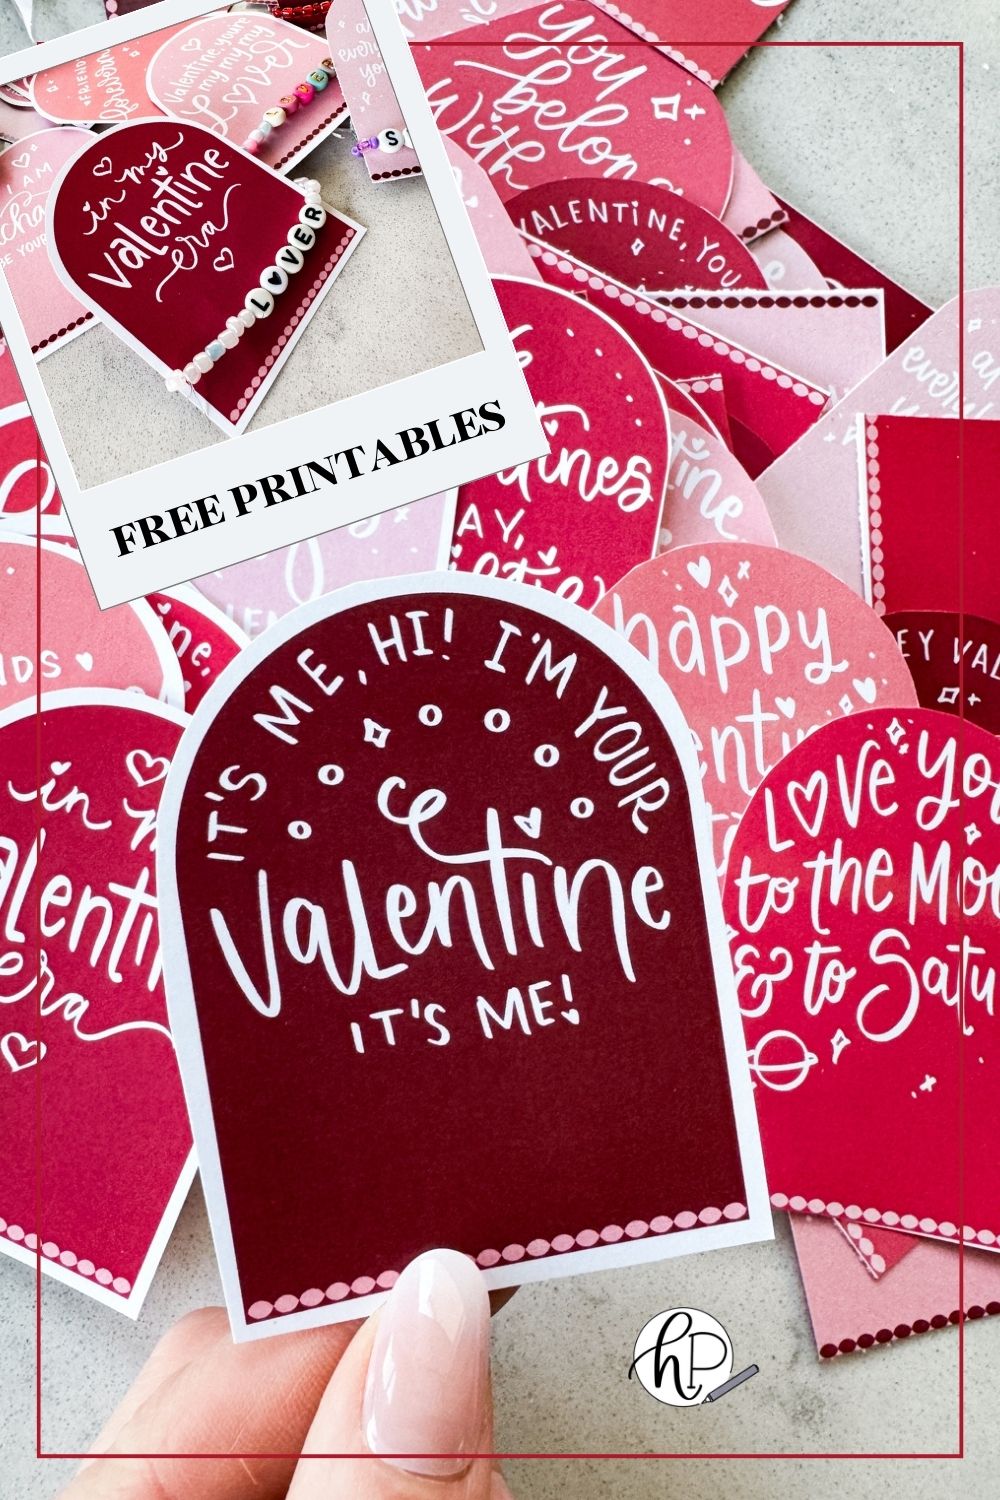 taylor swift themed valentines day cards printed and cut to size (arch shaped pink and deep burgundy color with white hand lettered song lyrics) shown on marble countertop. held valentine reads: it's me, hi! i'm your valentine, it's me! image overlay shows a valentine that reads 'in my valentine era' with a 'lover' friendship bracelet as the favor. text over reads: free printables